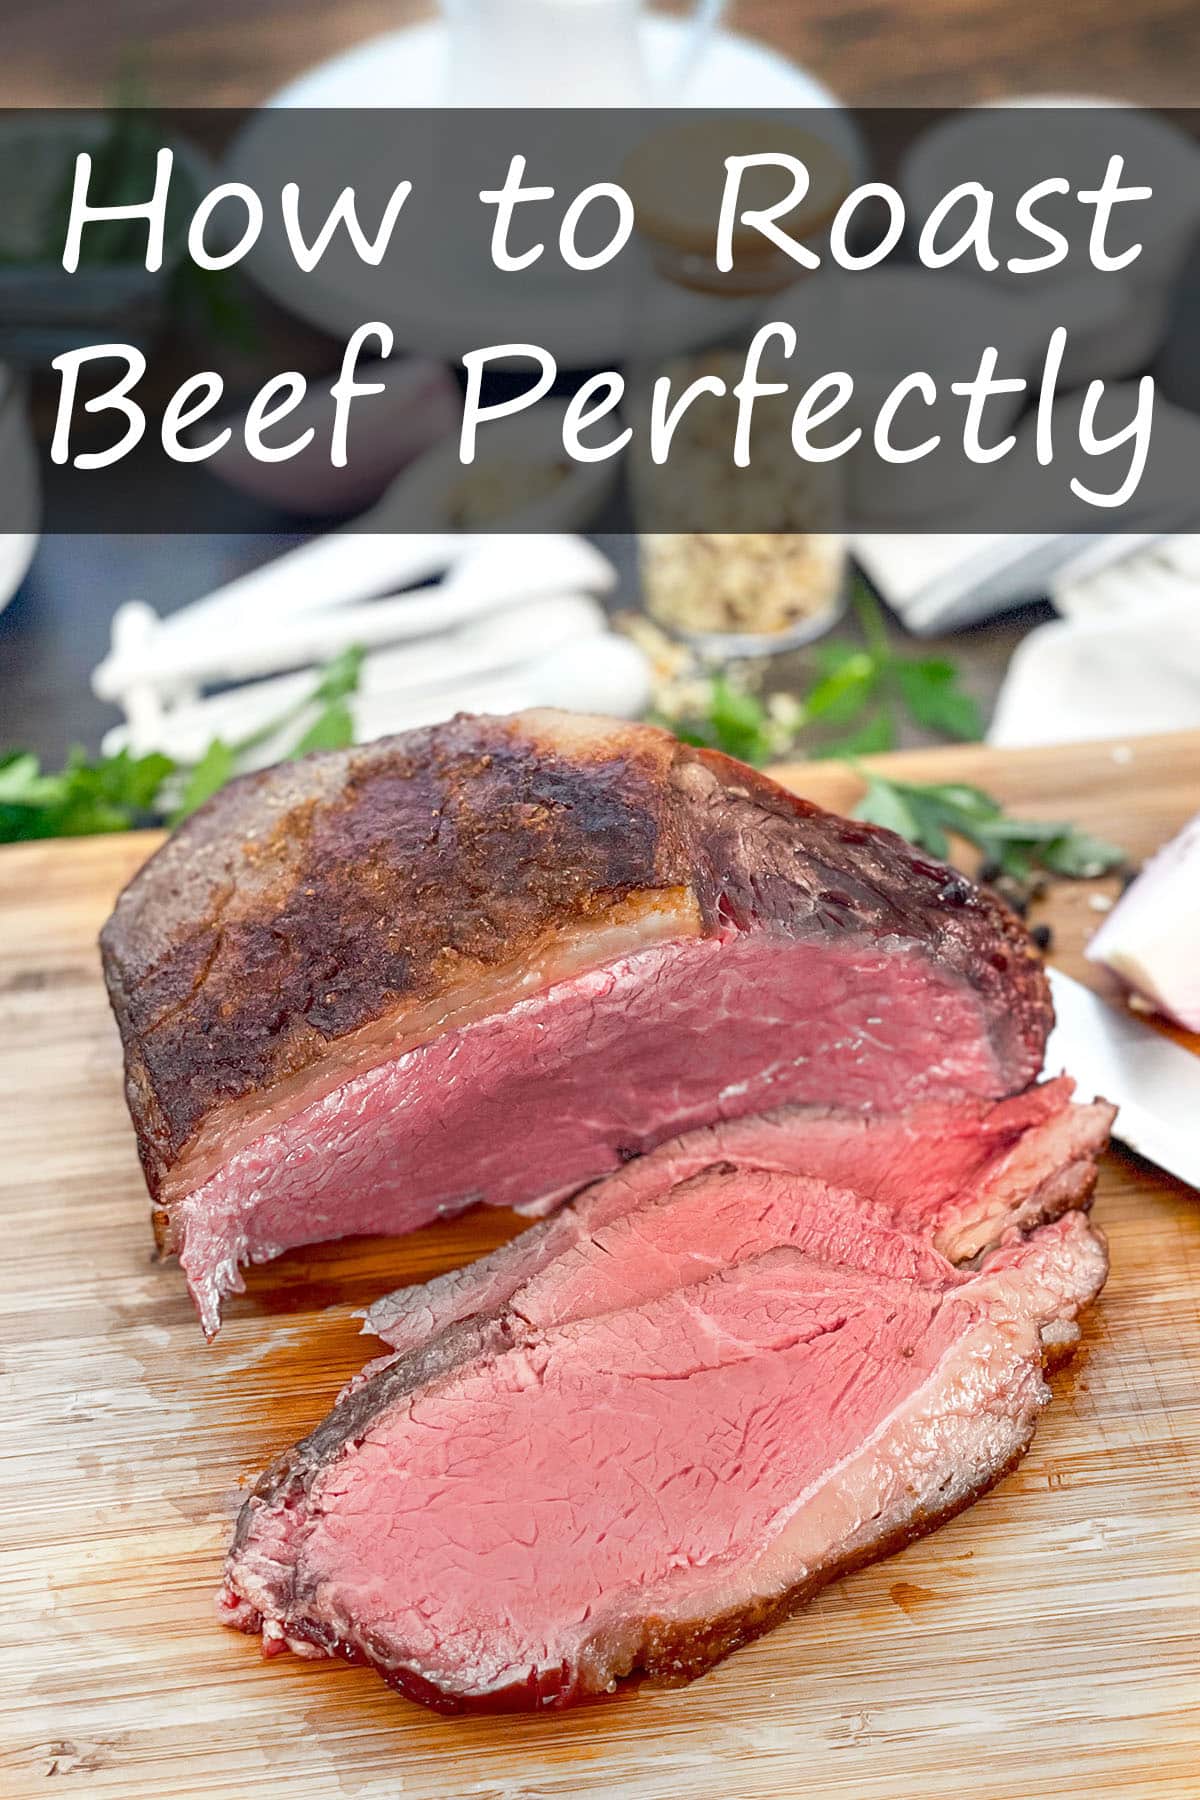 How to Roast Beef Perfectly